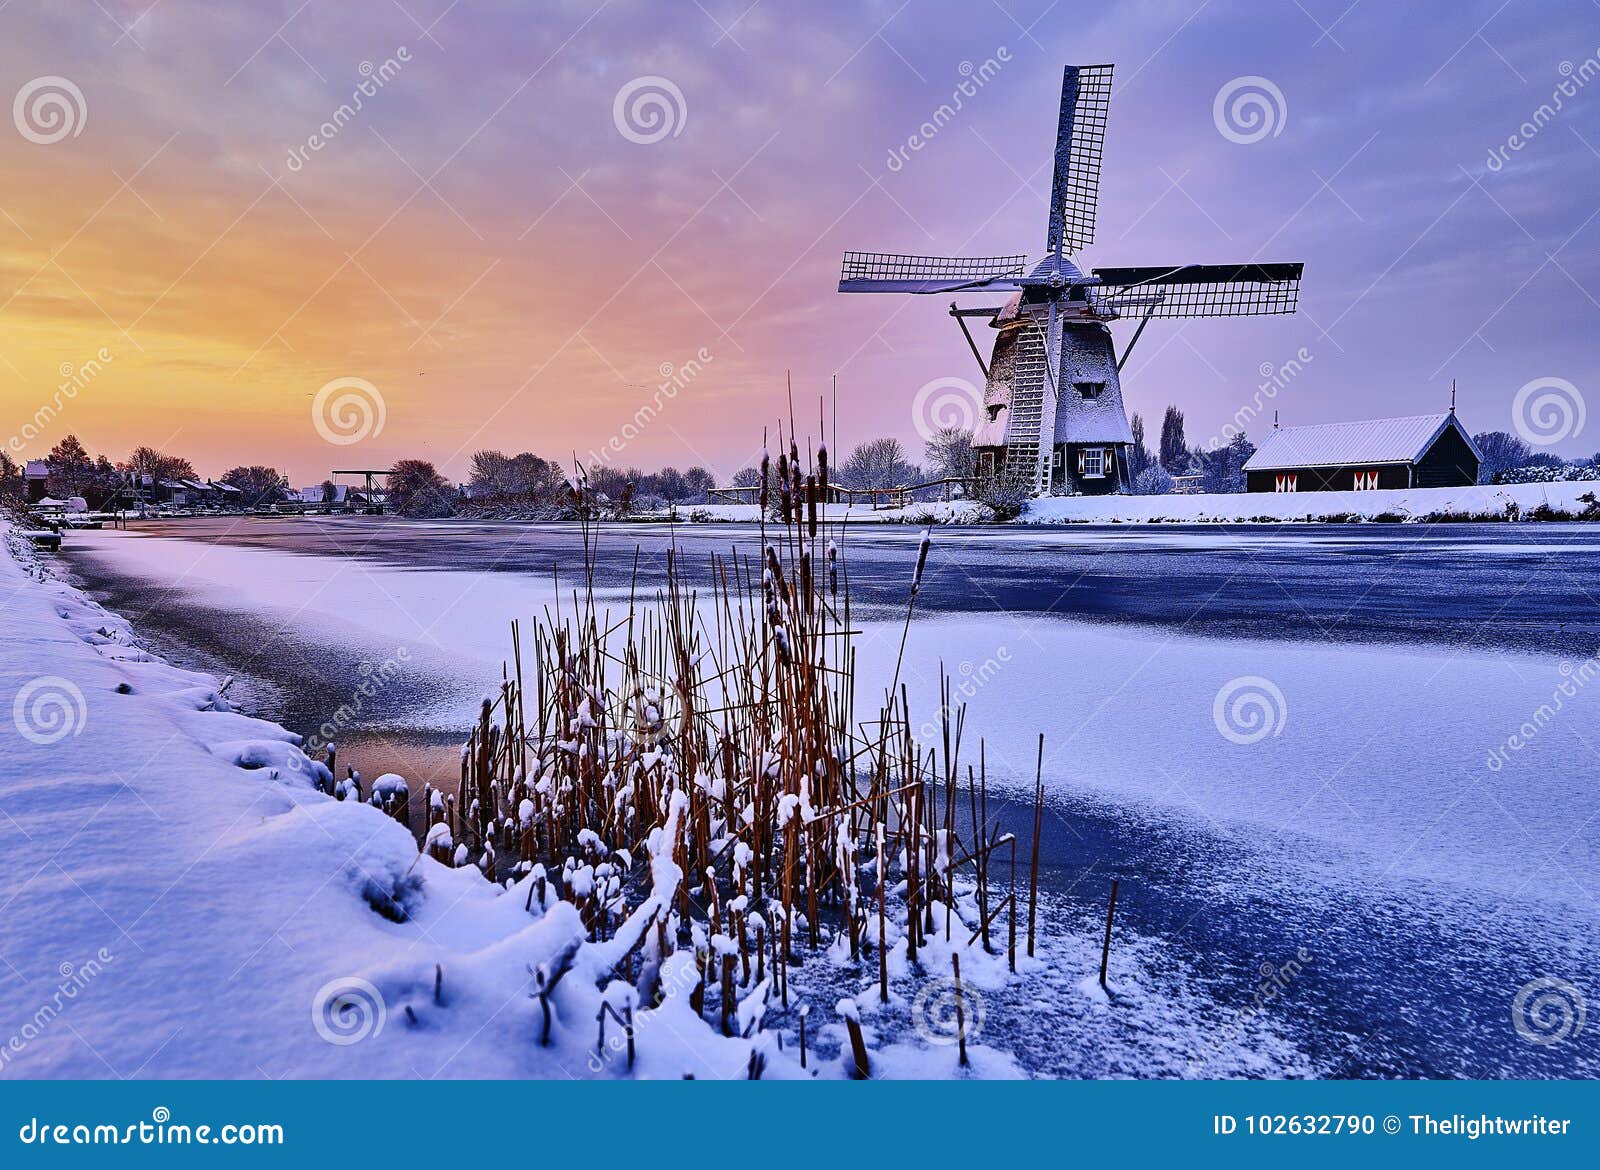 dutch windmill in the snow of a holland winter